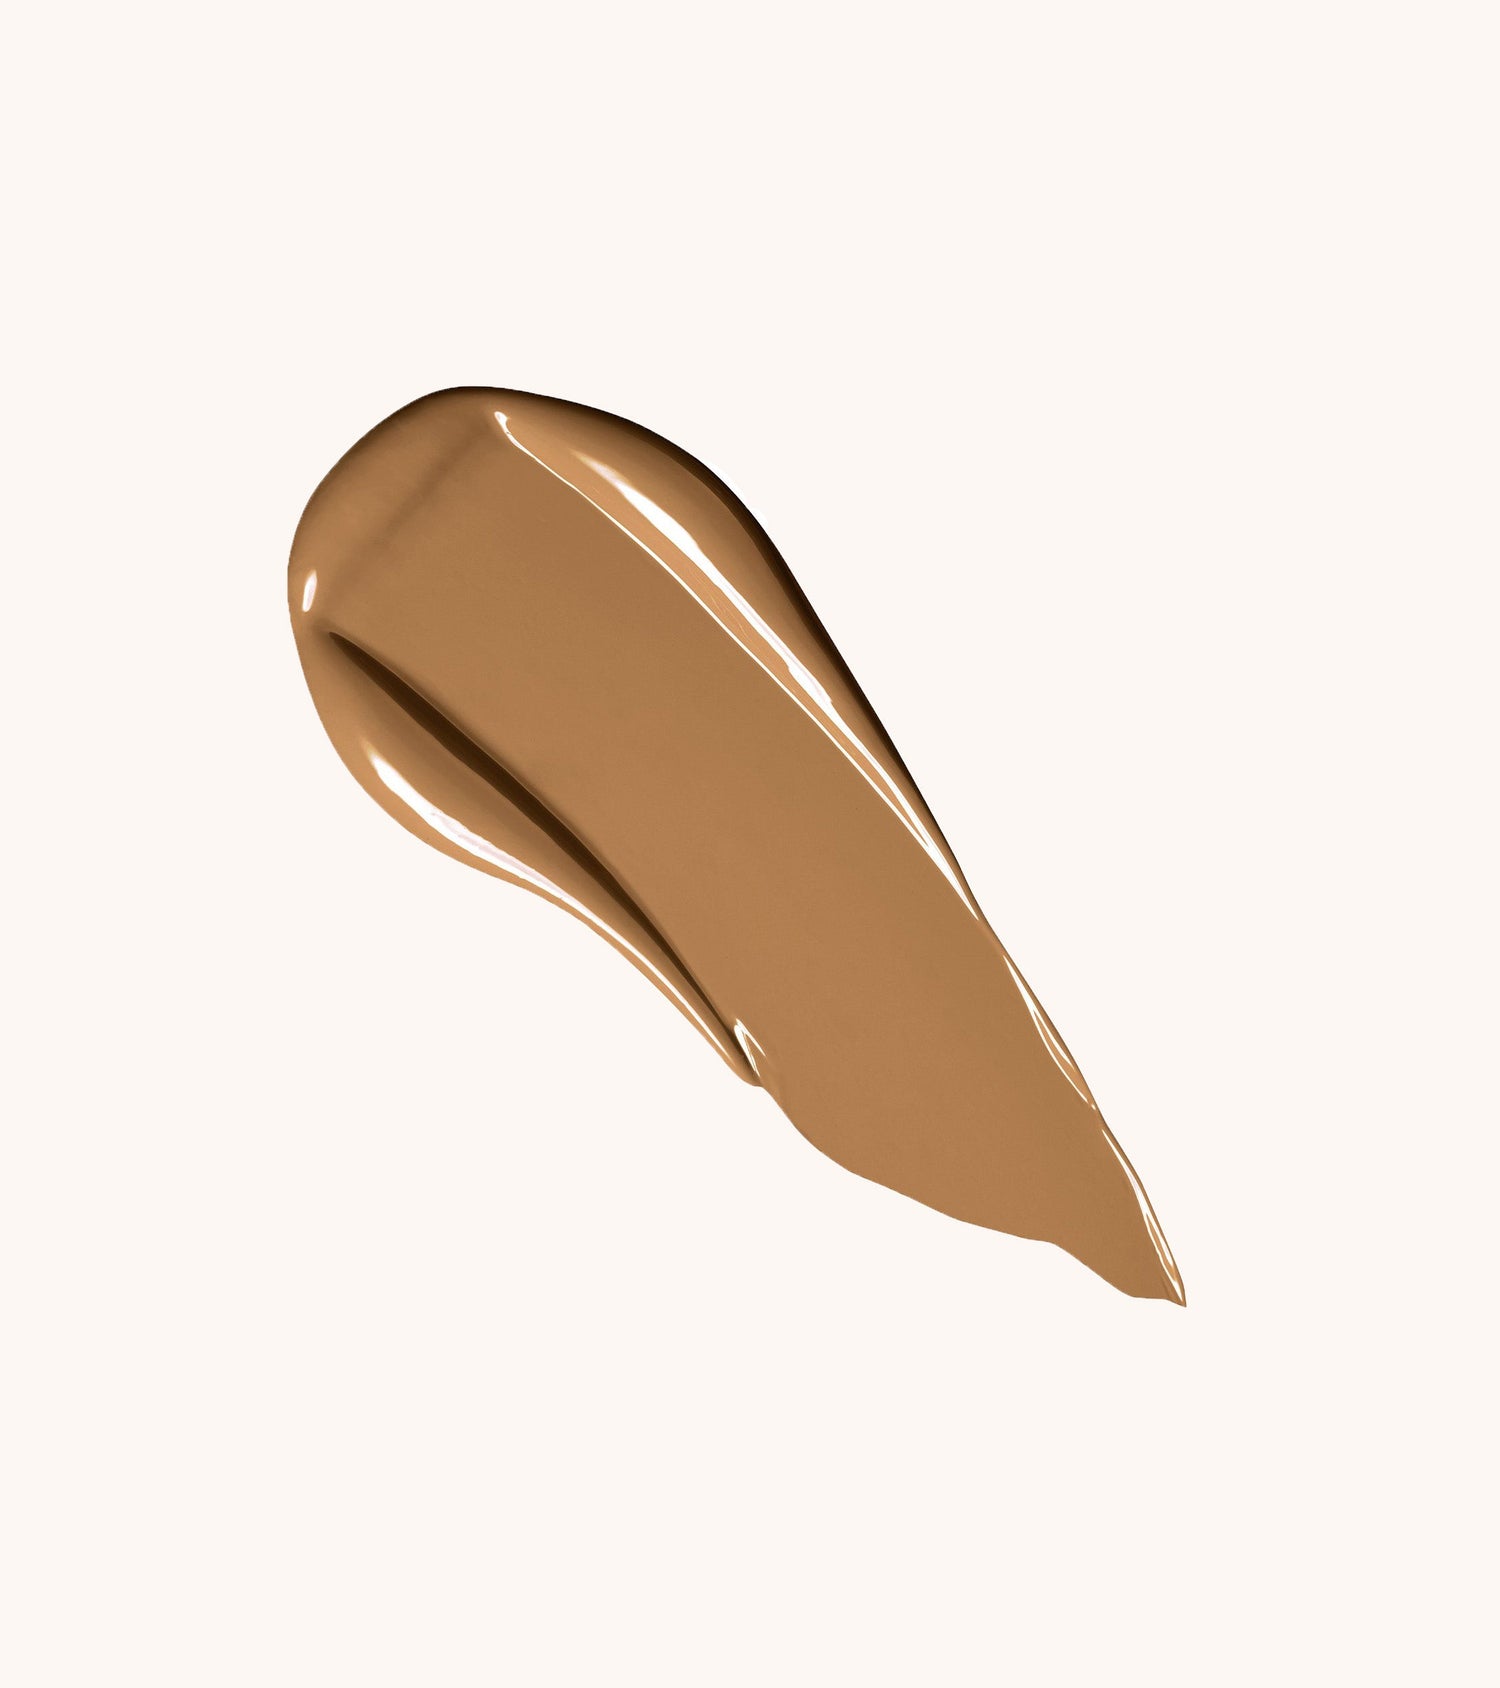 Authentik Skin Perfector Concealer (210 Pure) Main Image featured